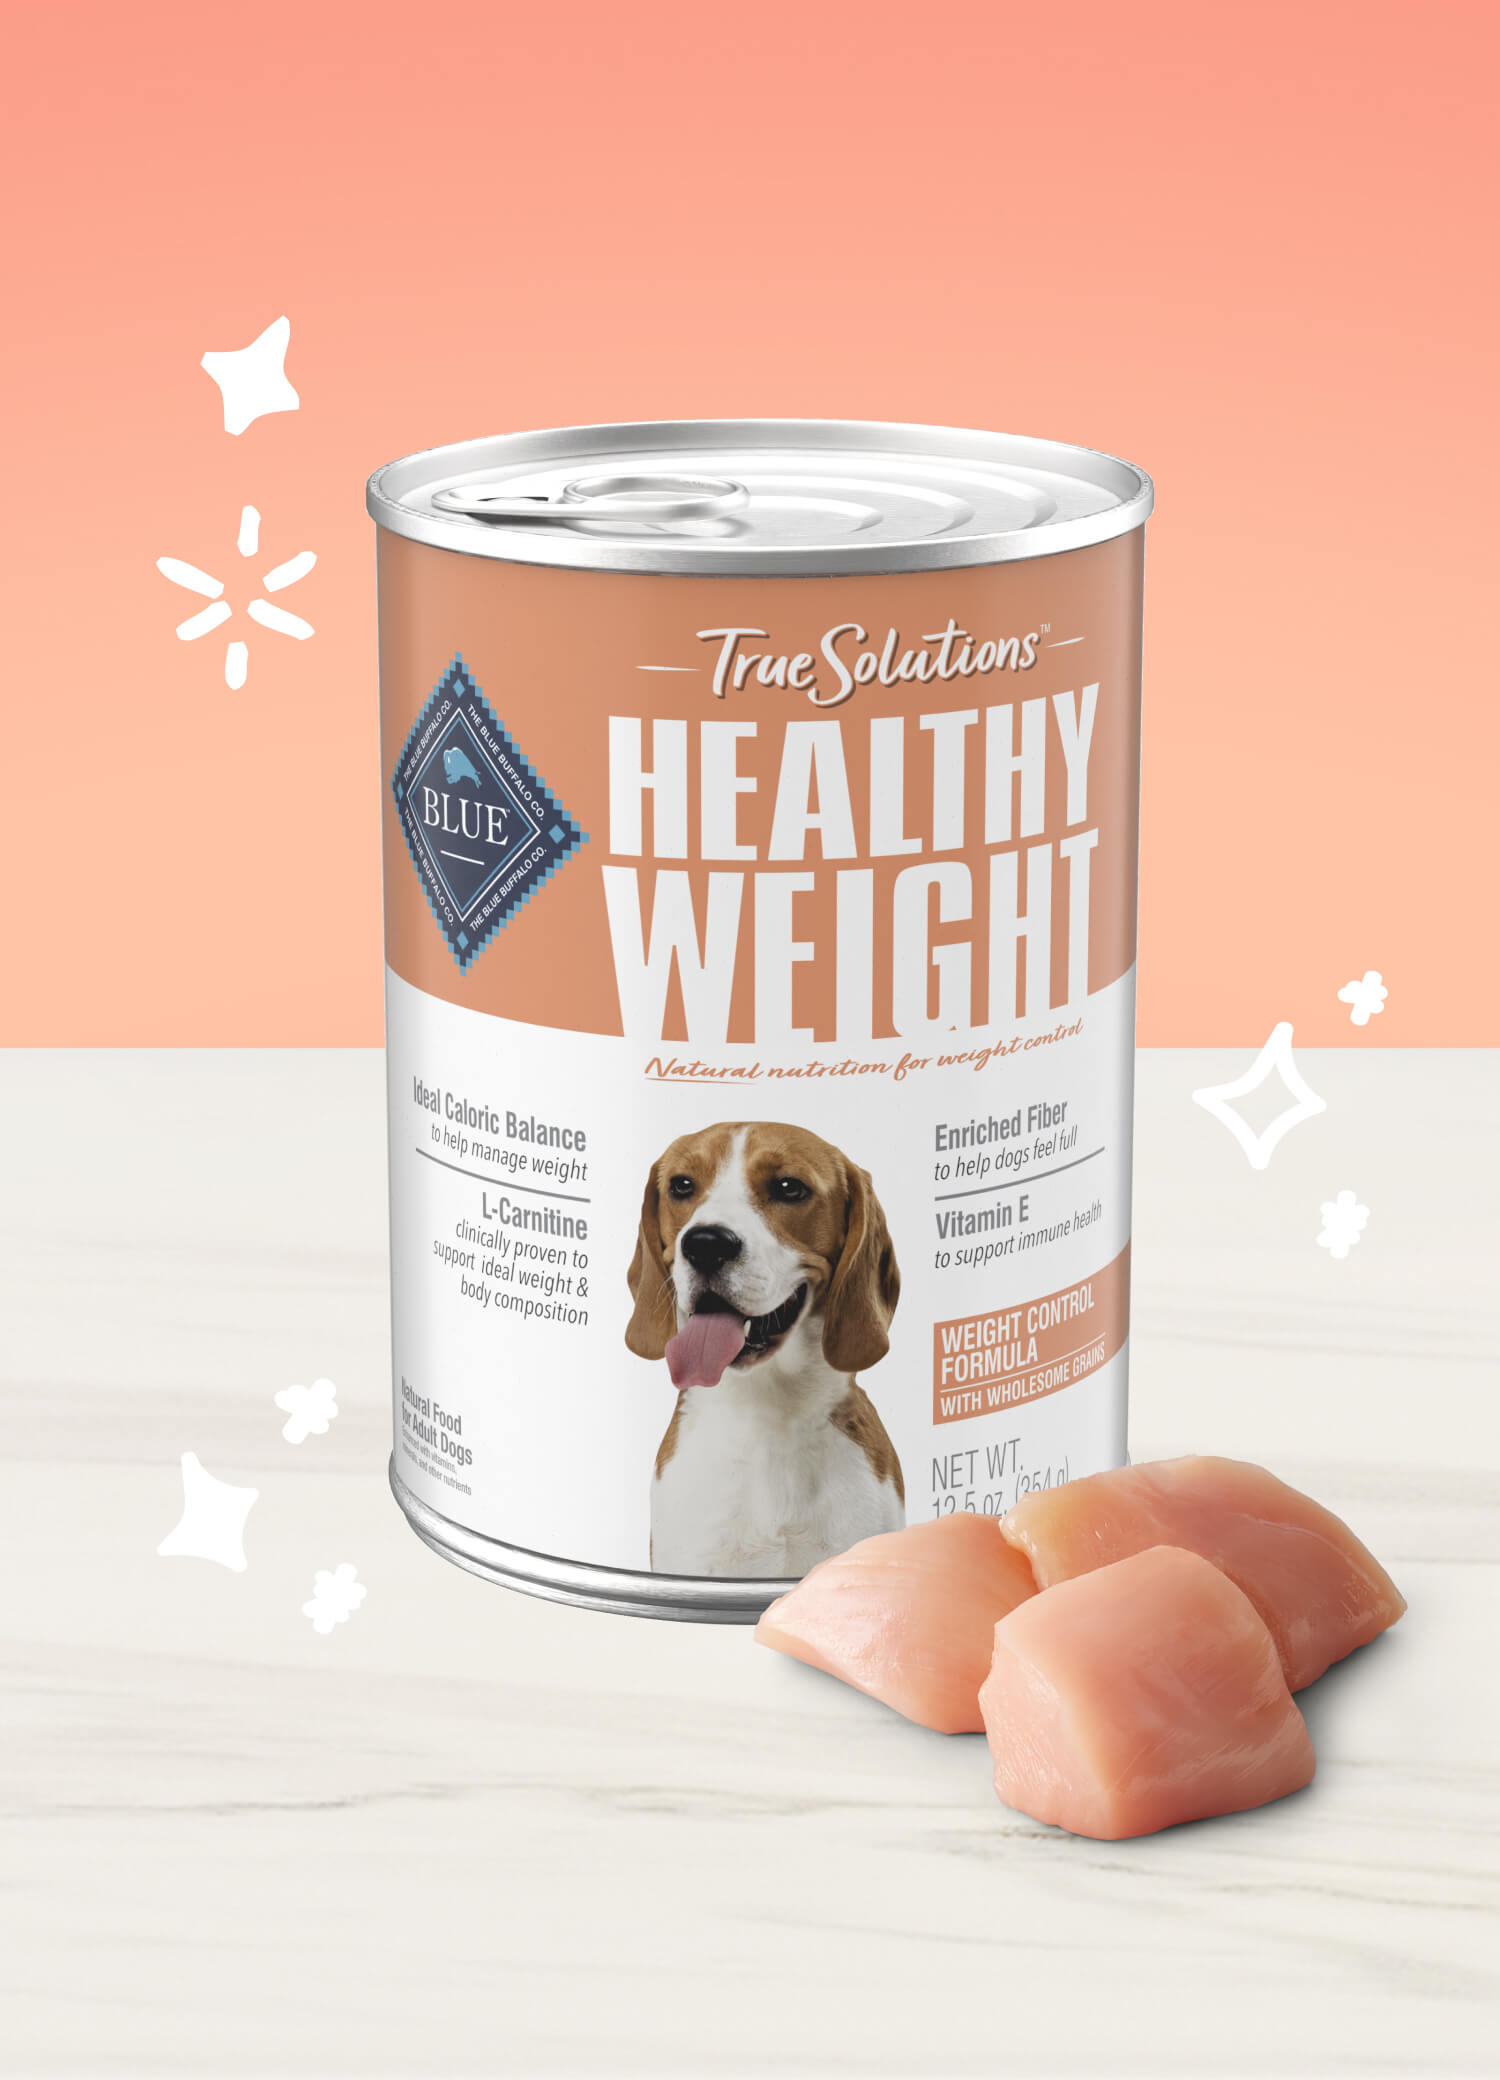 Blue true solutions healthy weight control dog wet food